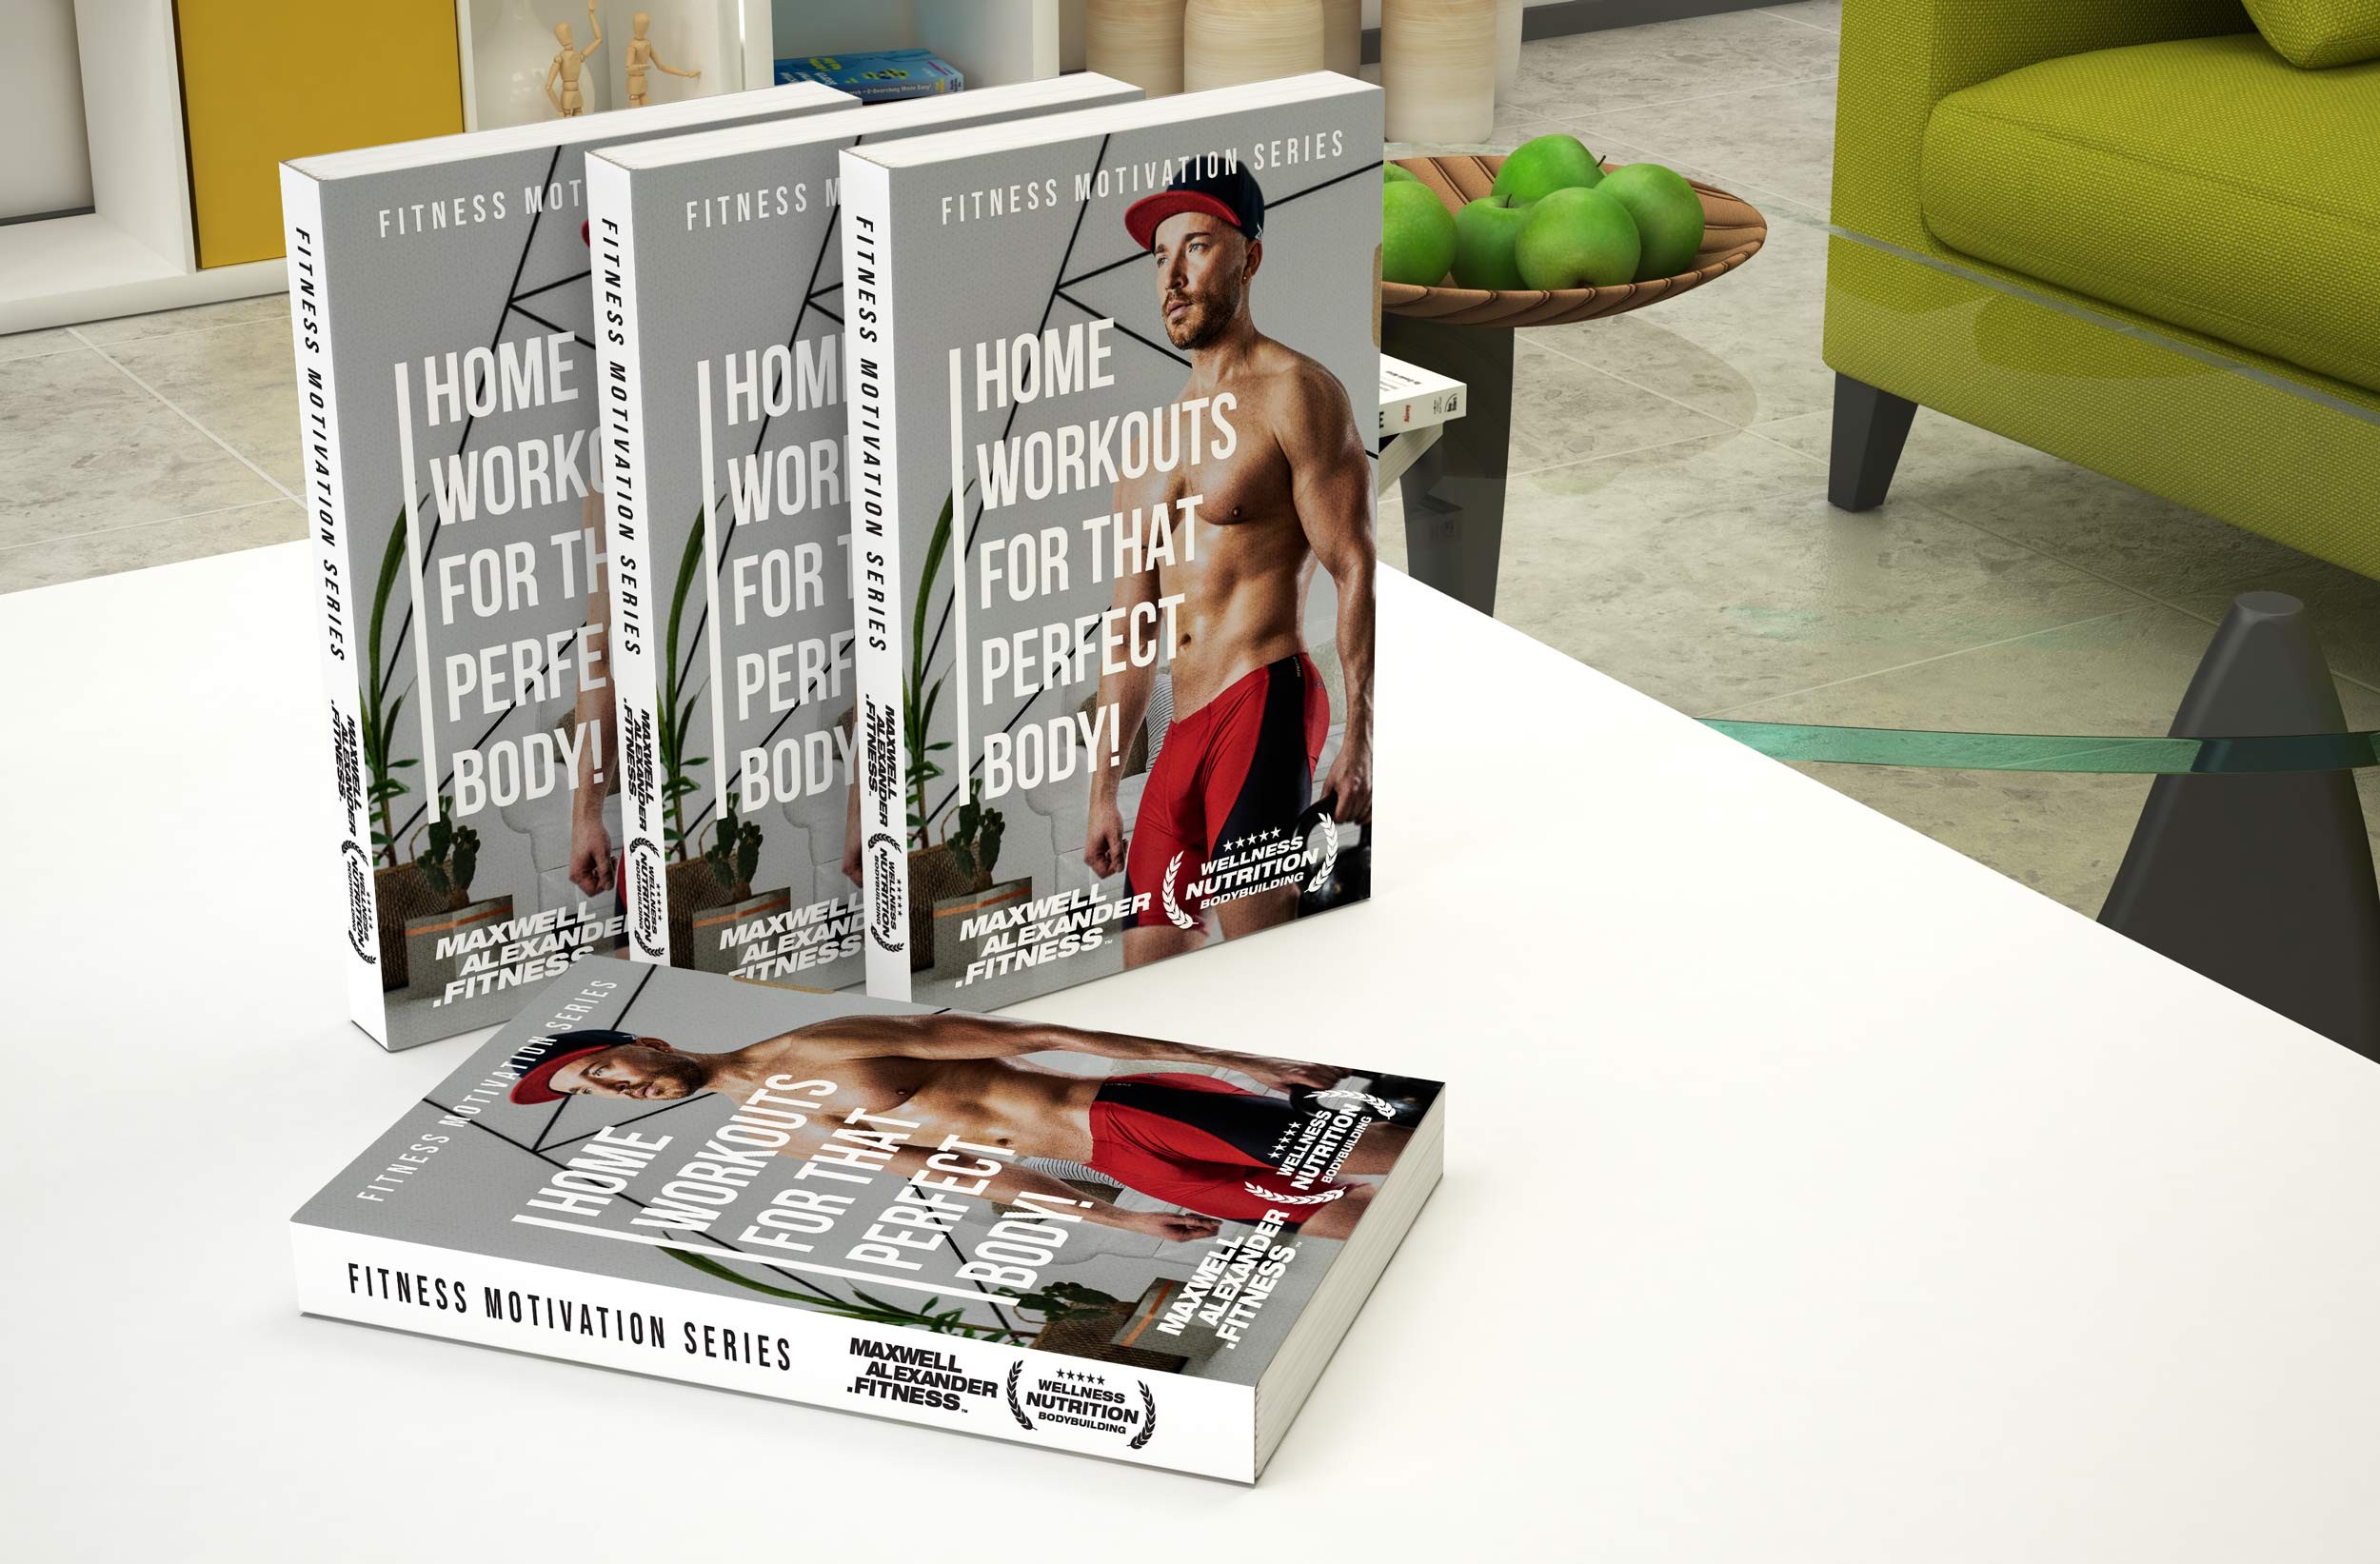 Discover Home Workouts for That Perfect Body - Fitness Motivation Book Series by Maxwell Alexander